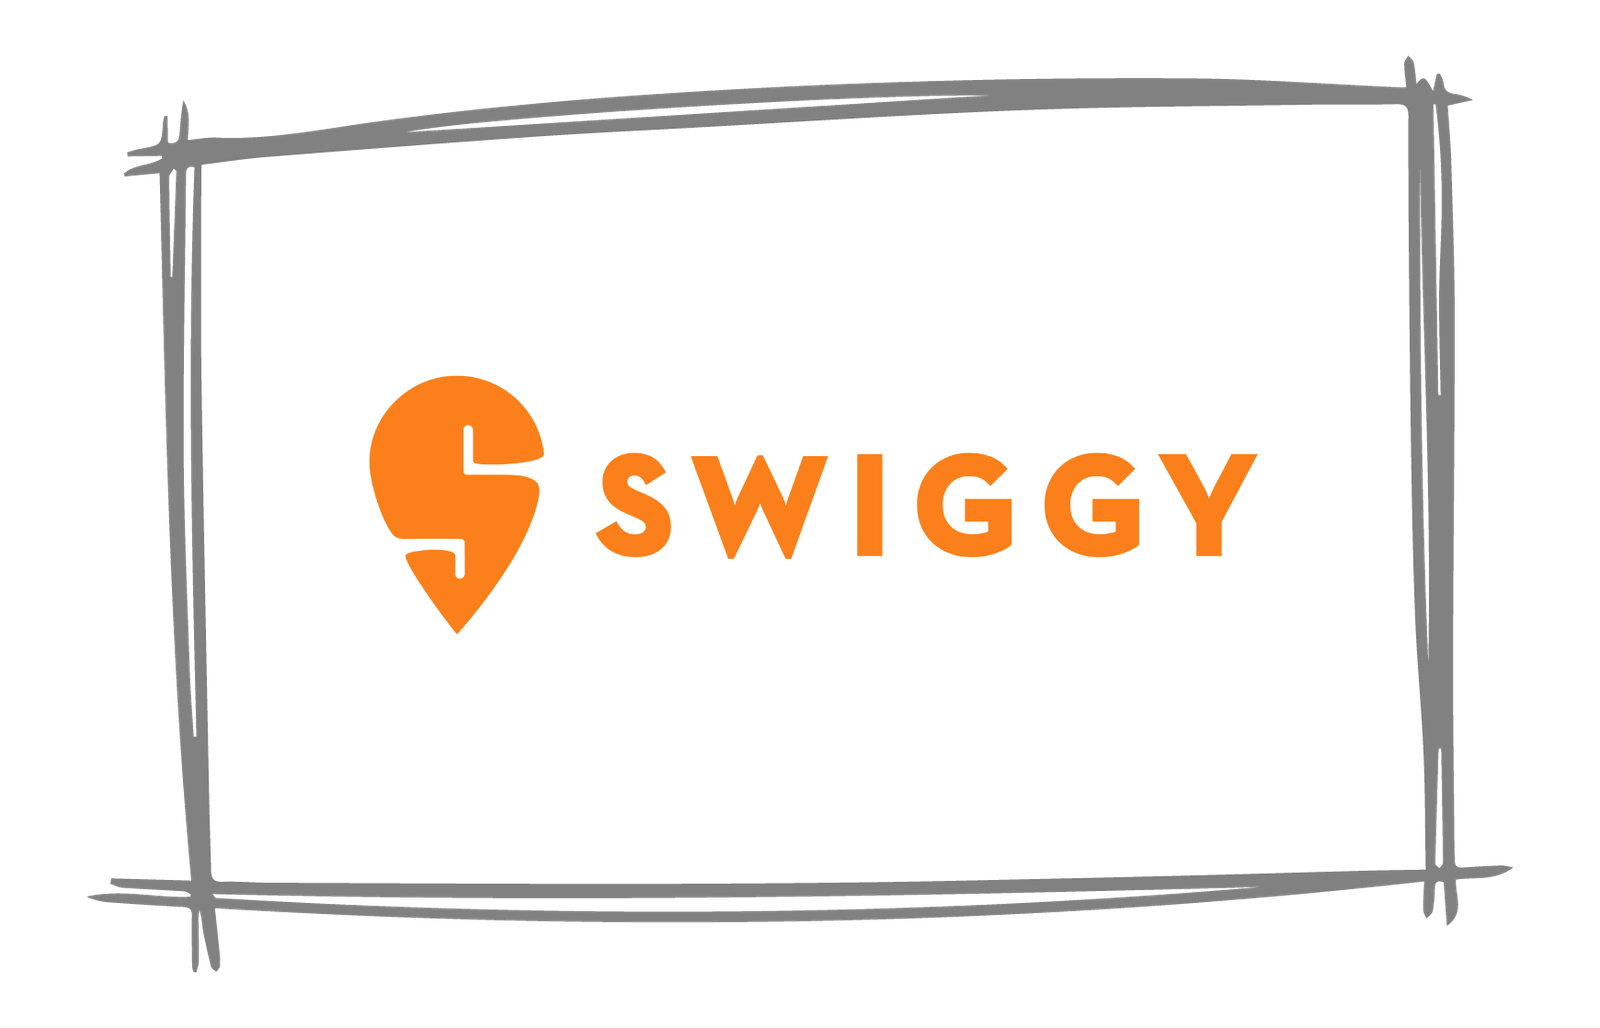 Swiggy for brand voice and messaging